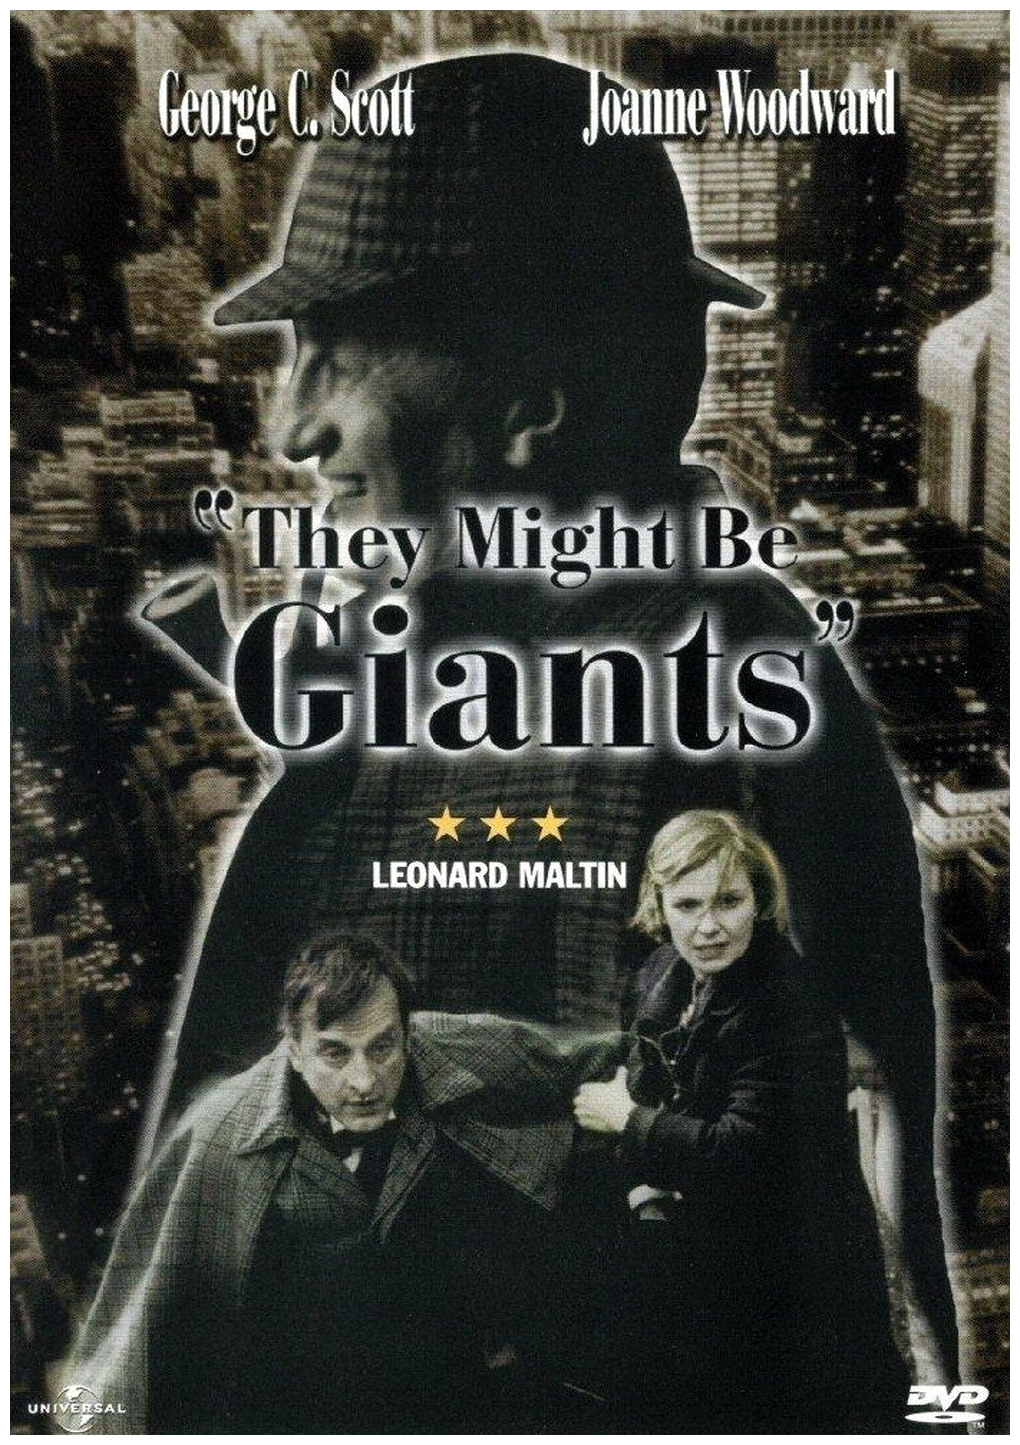 They Might Be Giants DVD